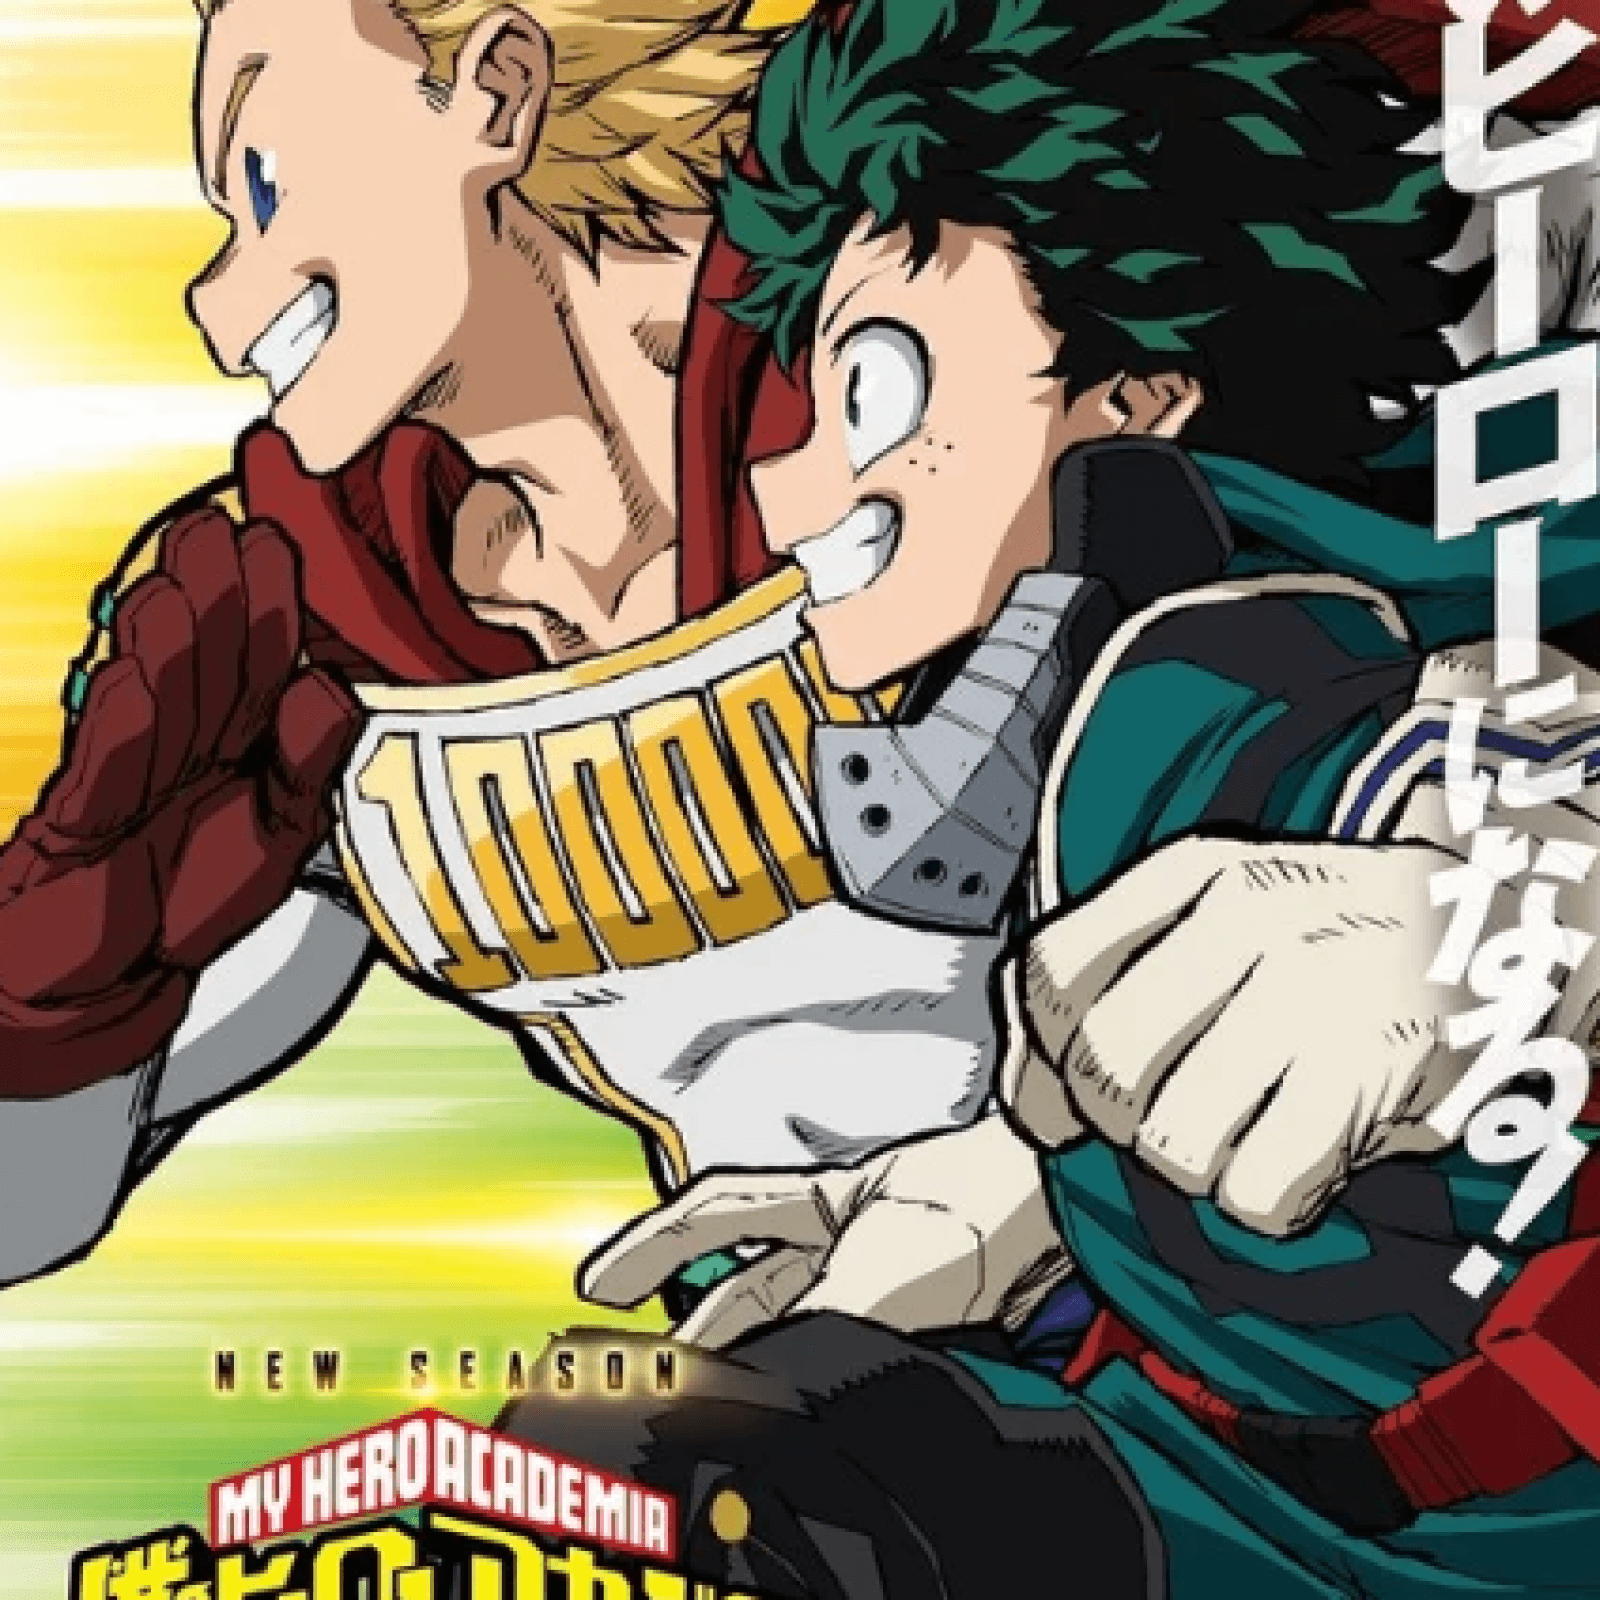 My Hero Academia' Season 4 Release Date Confirmed for Fall 2019